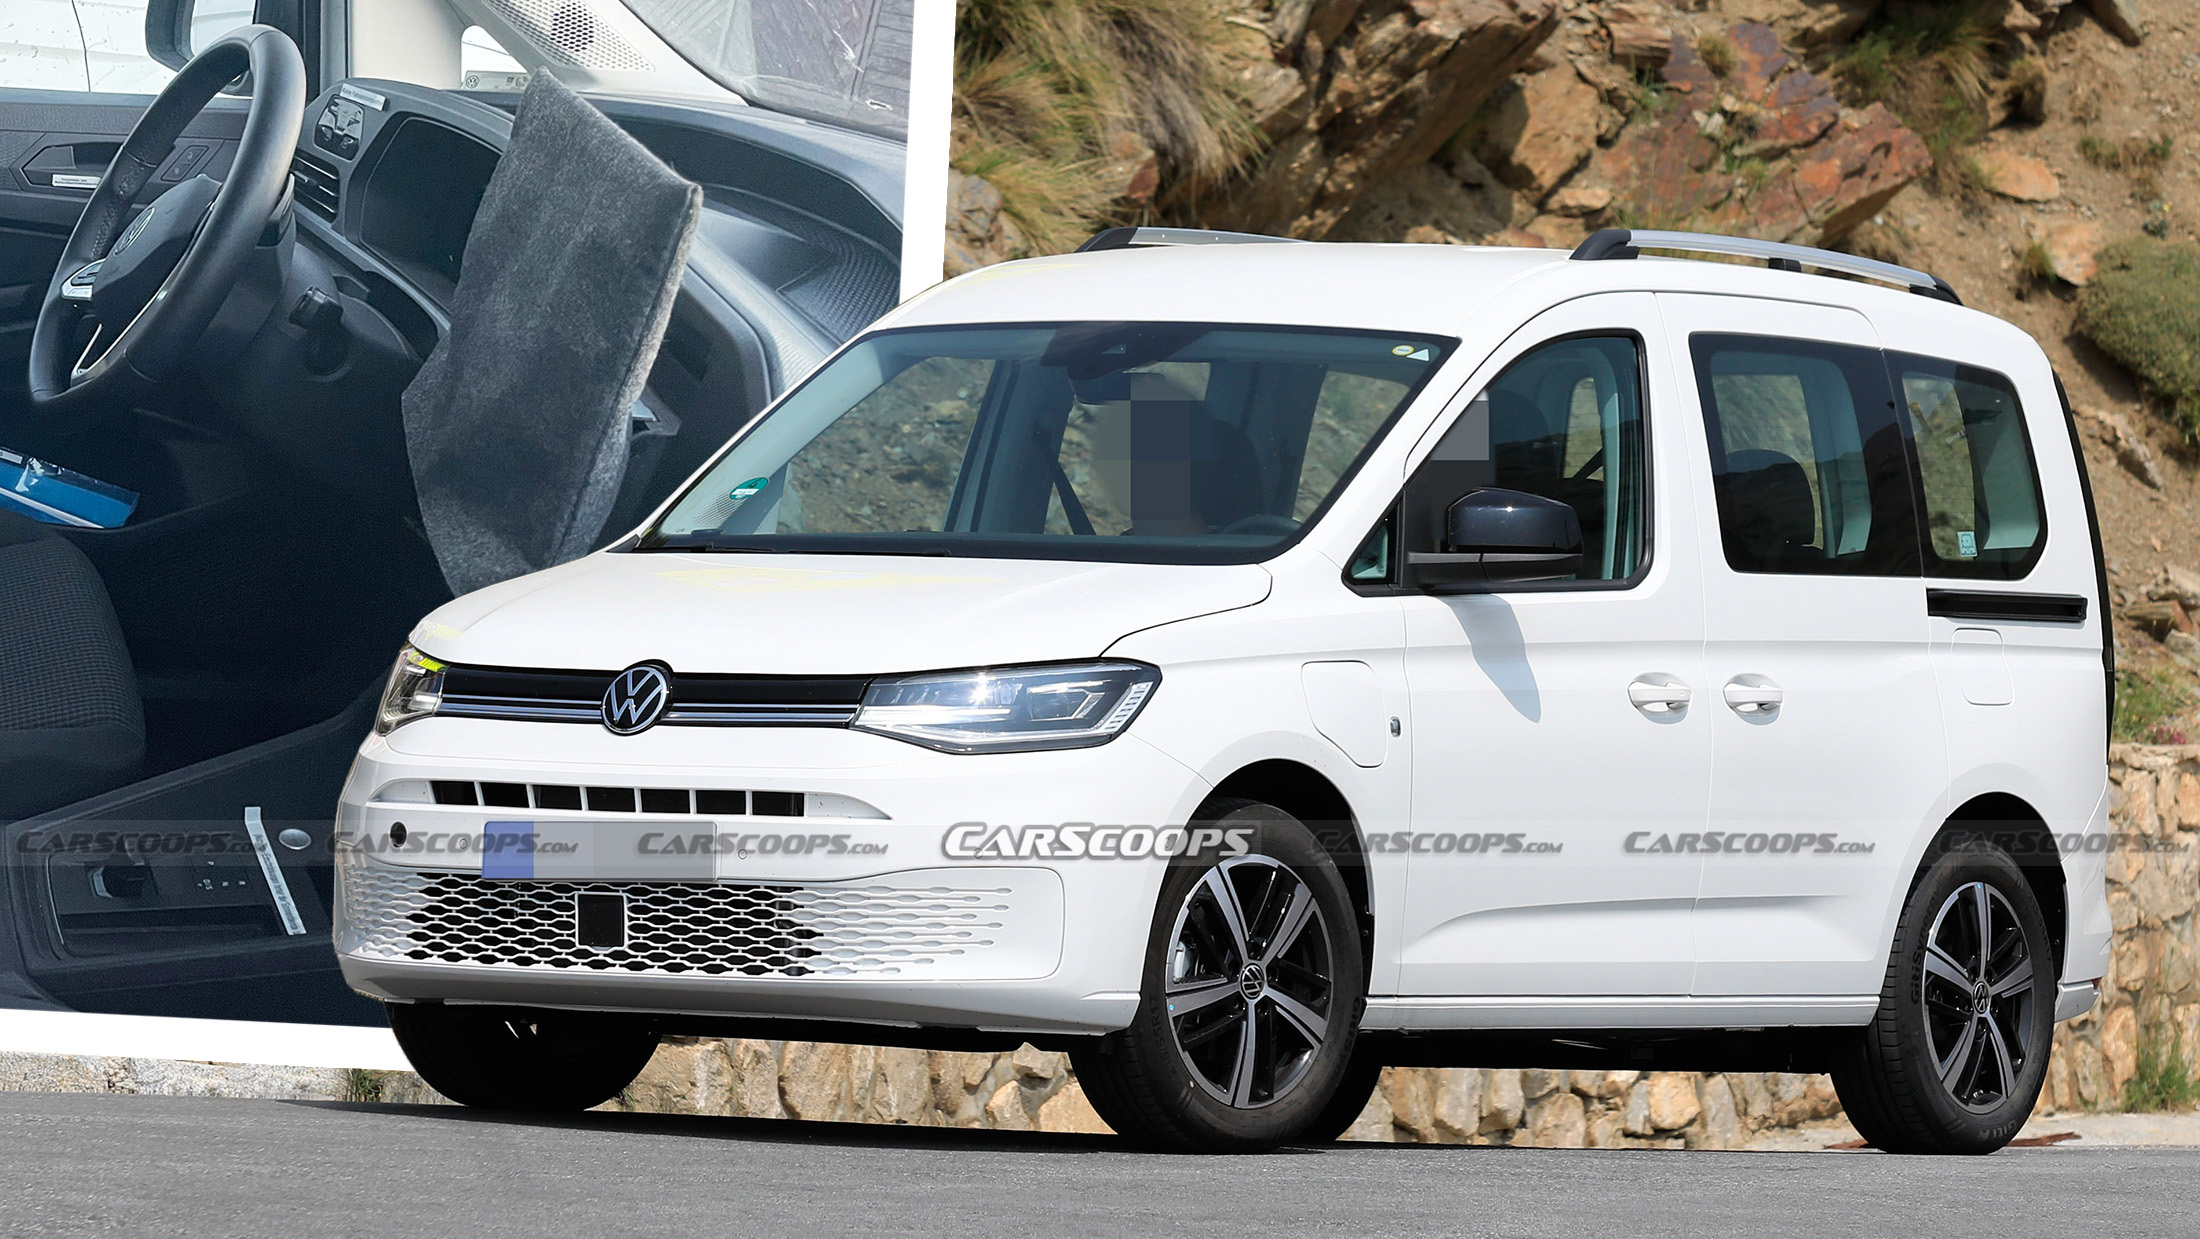 VW Caddy eHybrid Shows It All, Including Massive Infotainment